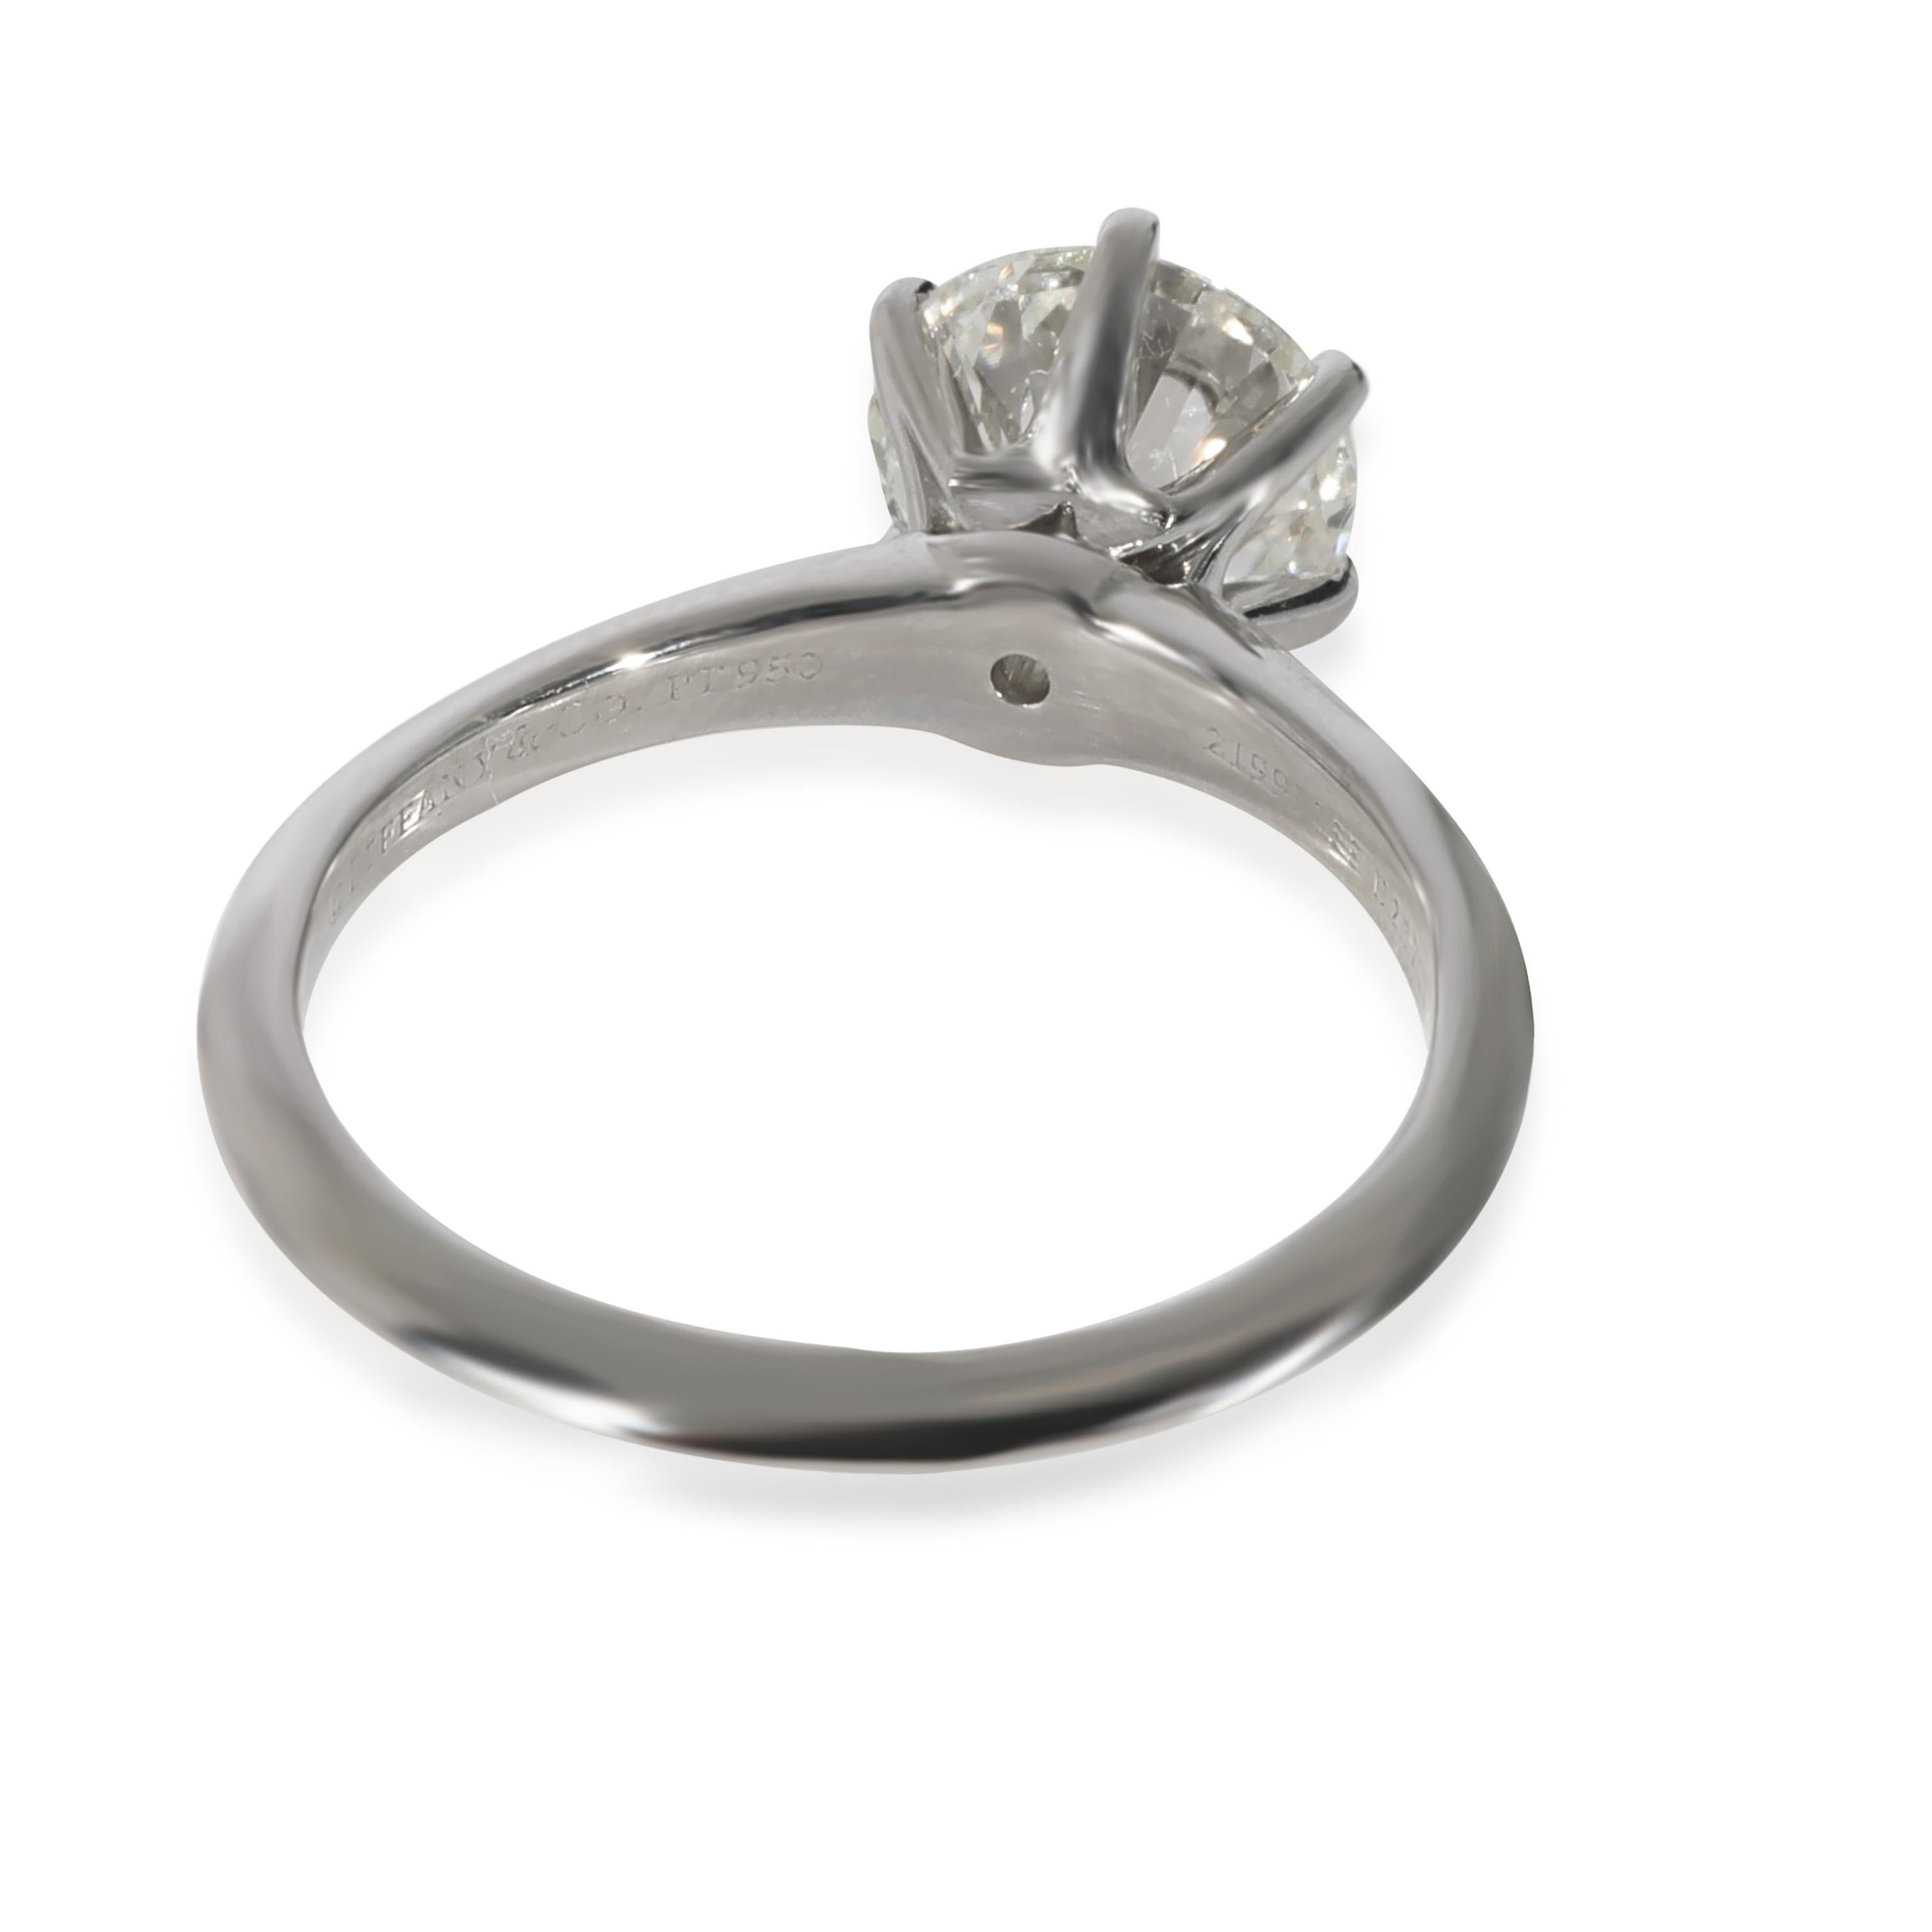 Tiffany & Co. Solitaire Diamond  Engagement  Ring in  Platinum I VS1 2.17 CTW

PRIMARY DETAILS
SKU: 128310
Listing Title: Tiffany & Co. Solitaire Diamond  Engagement  Ring in  Platinum I VS1 2.17 CTW
Condition Description: Retails for 52700 USD. In